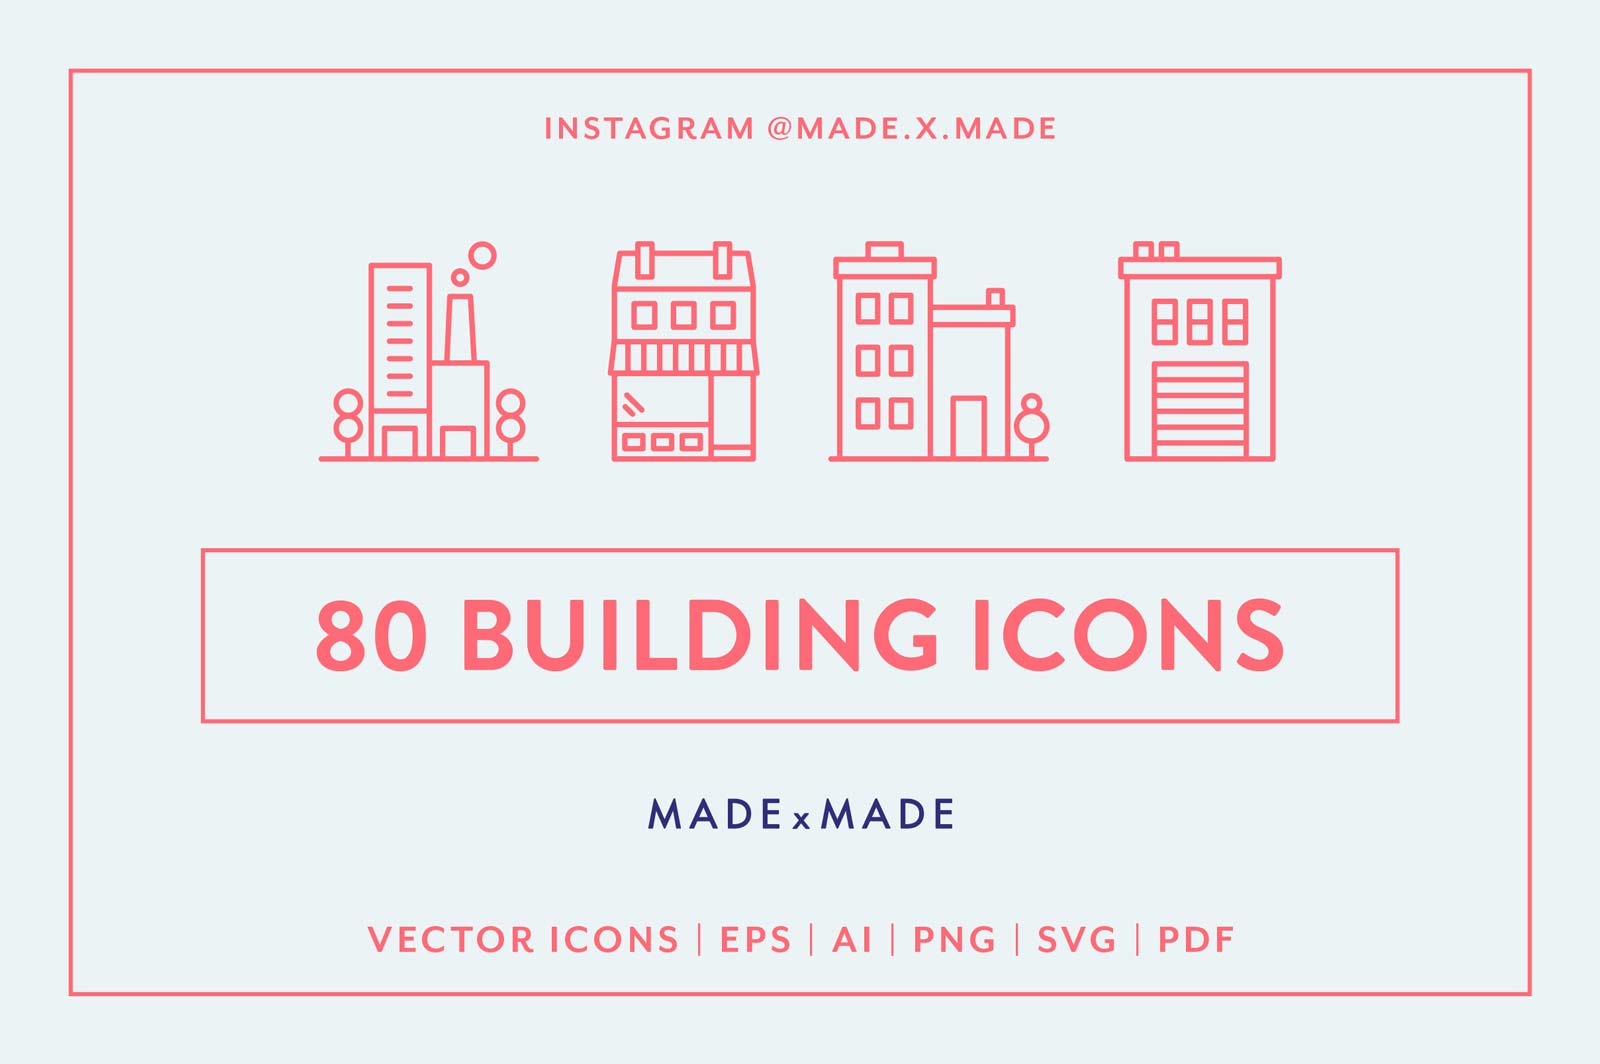 made x made icons buildings